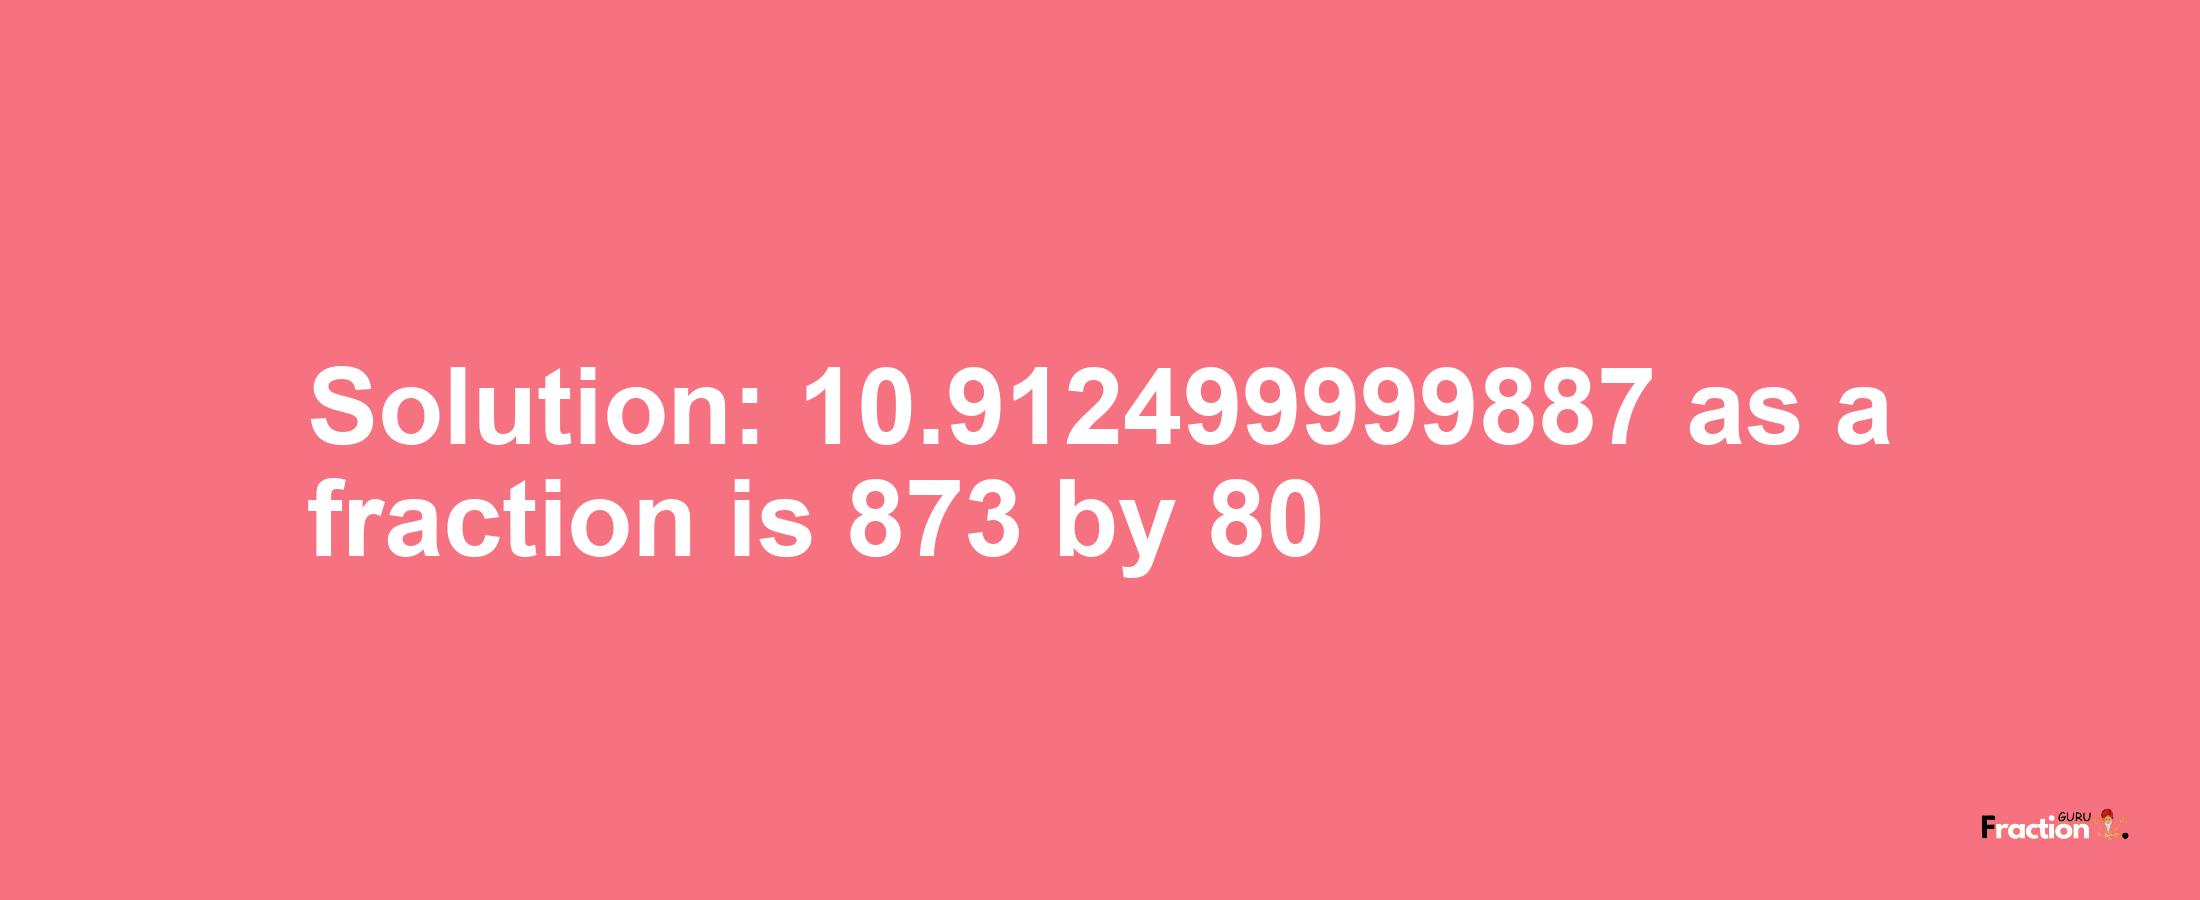 Solution:10.912499999887 as a fraction is 873/80